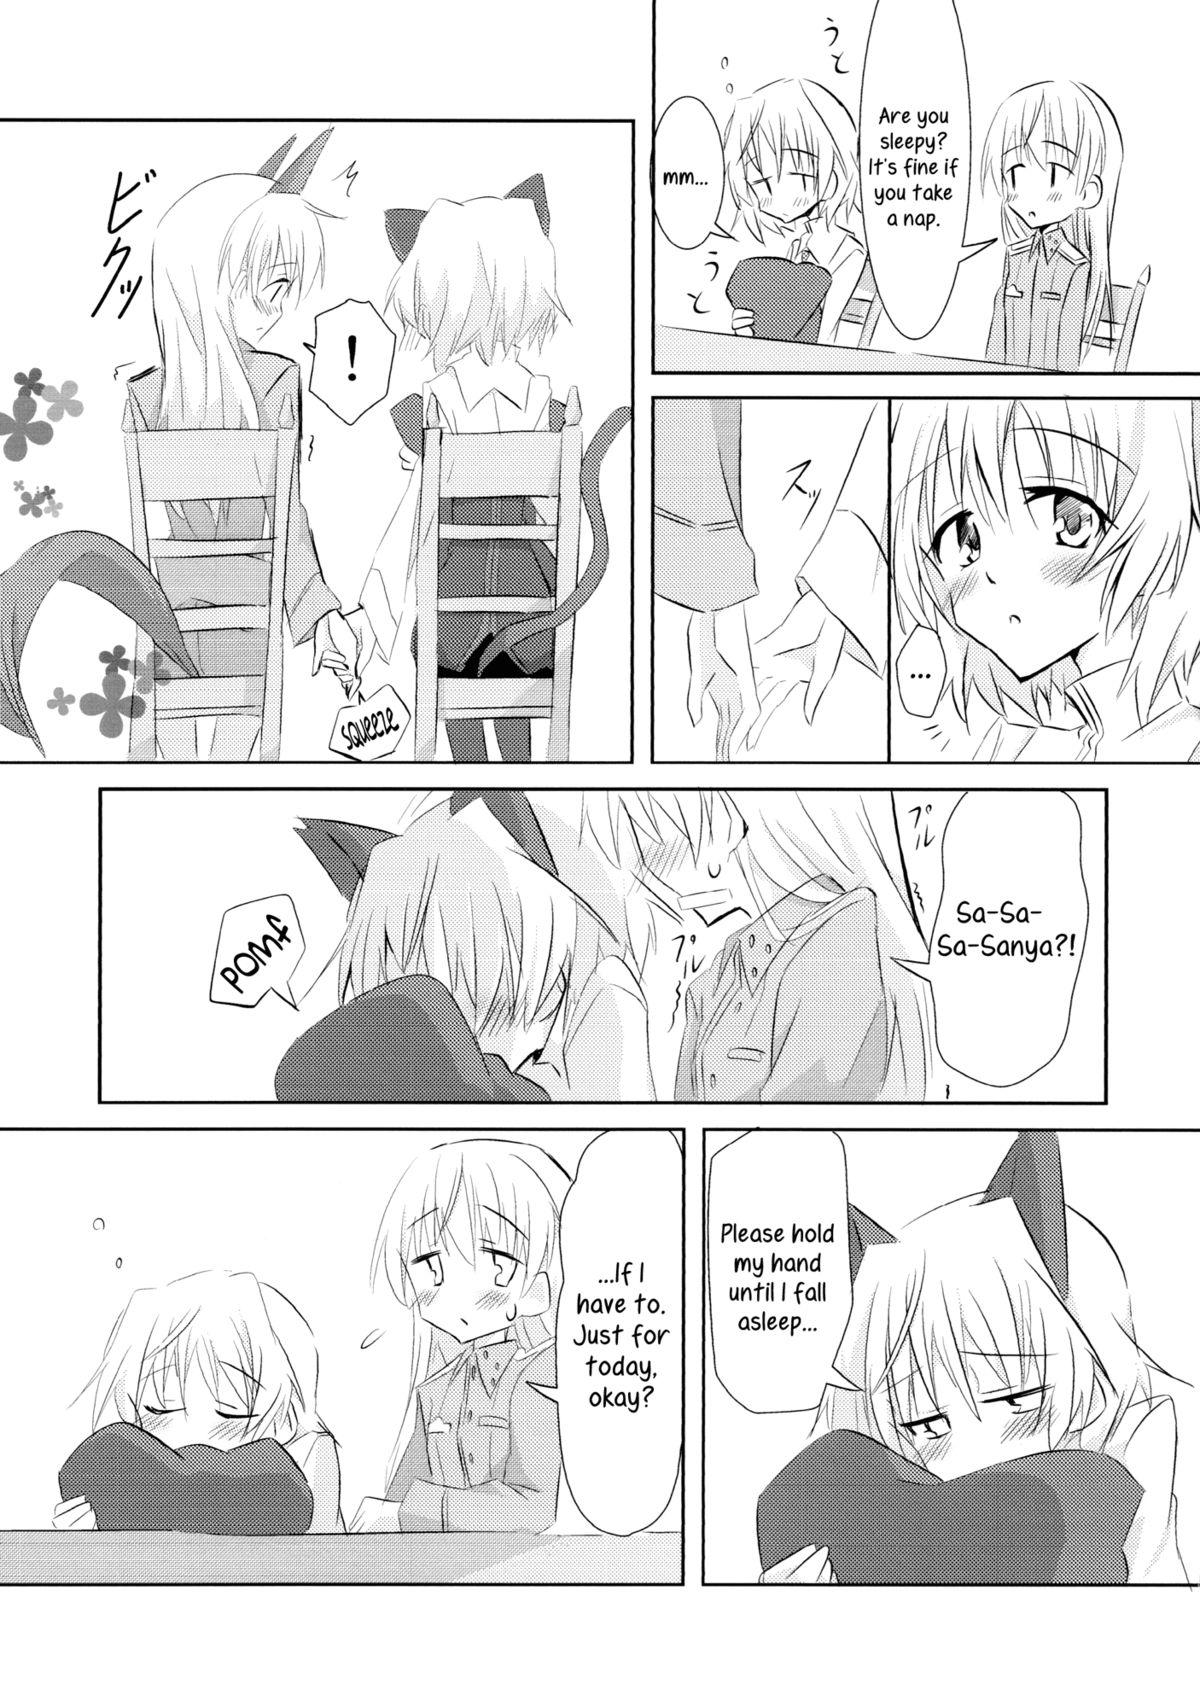 Orgy EilaNyaX - Strike witches Caliente - Page 4